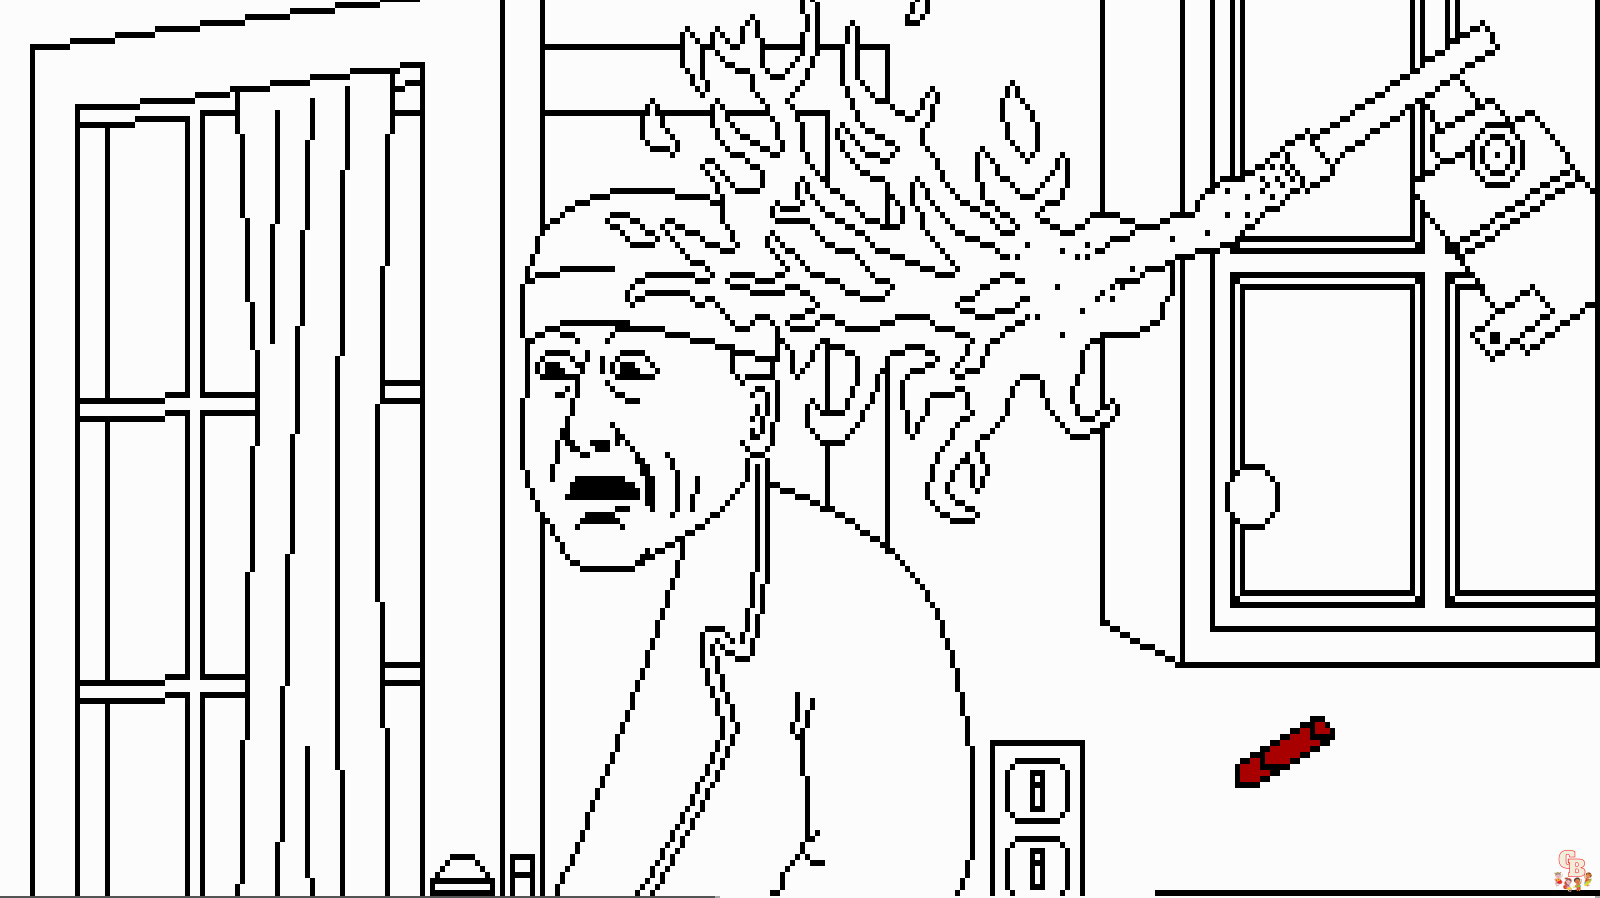 Home Alone Coloring Pages 1